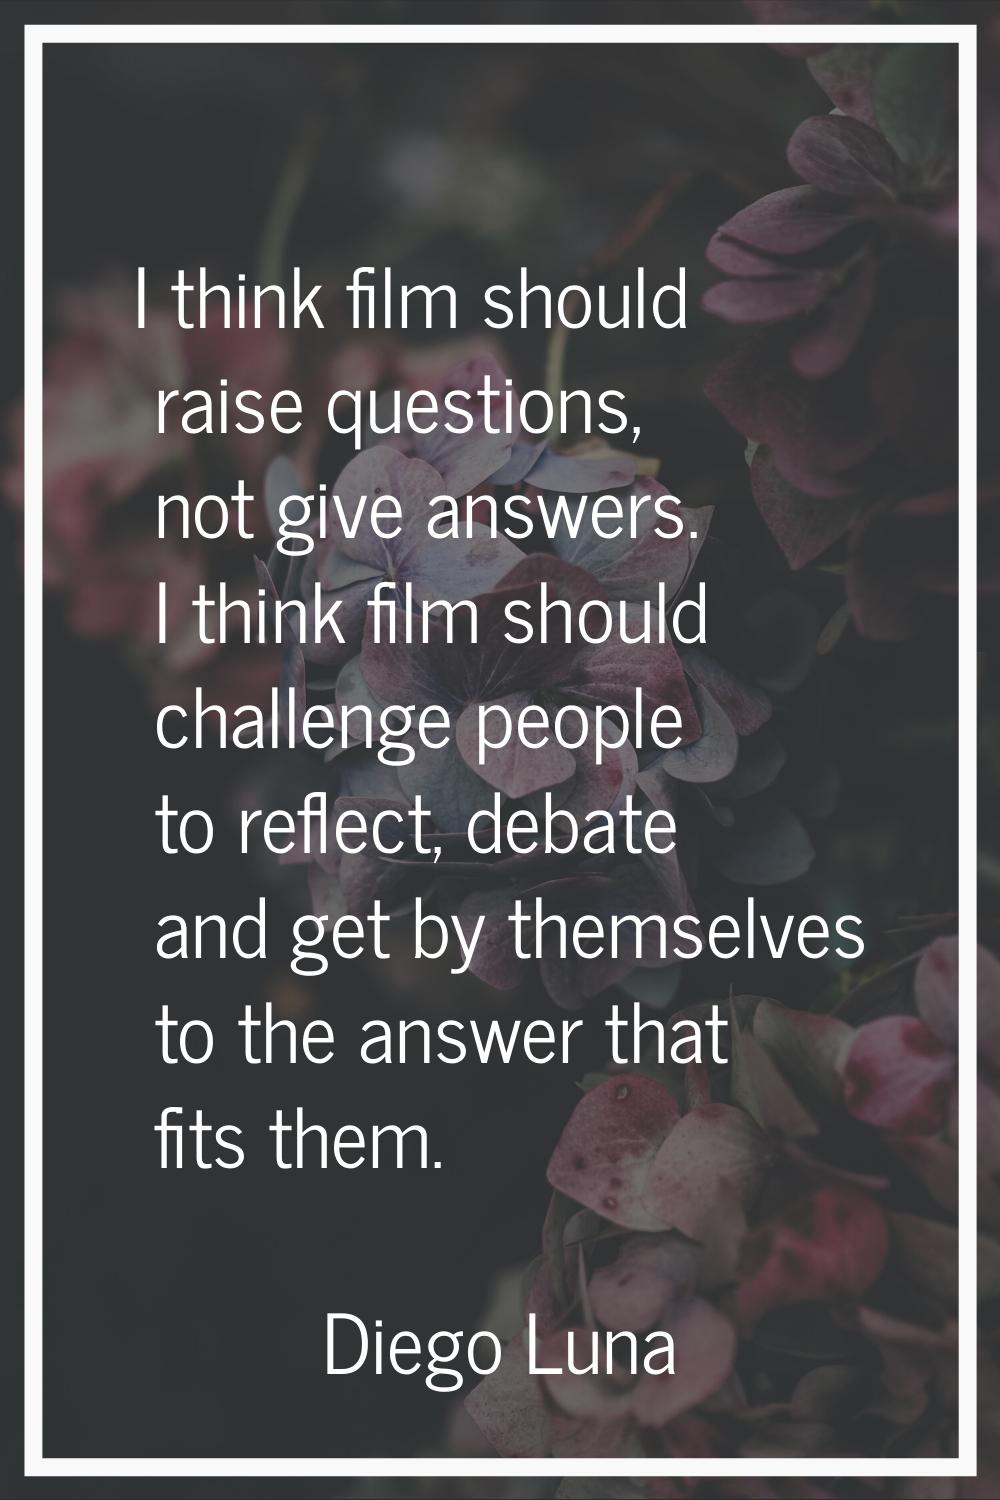 I think film should raise questions, not give answers. I think film should challenge people to refl